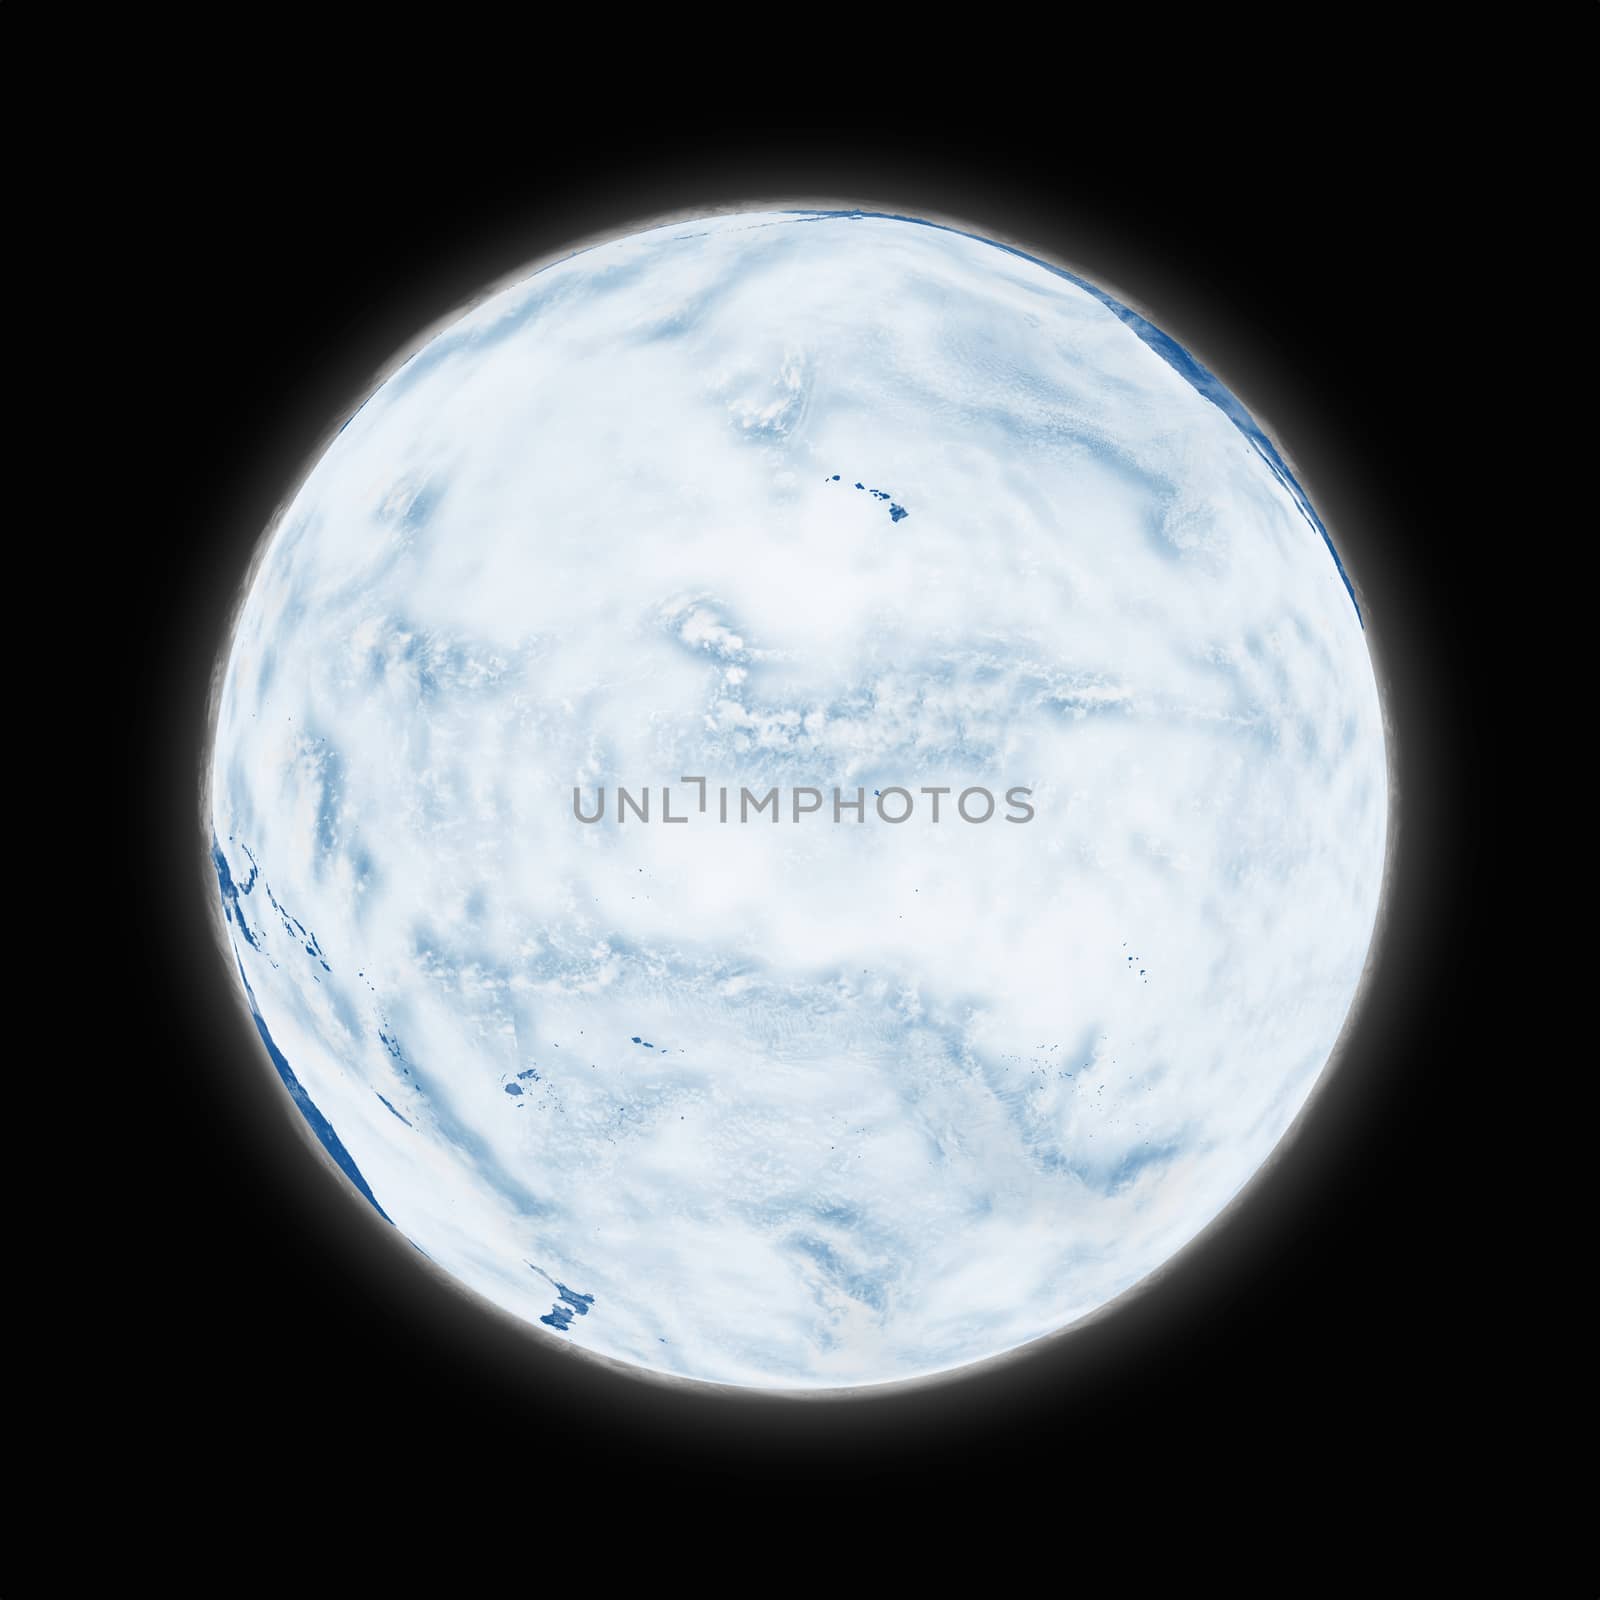 Pacific Ocean on blue planet Earth isolated on black background. Highly detailed planet surface. Elements of this image furnished by NASA.